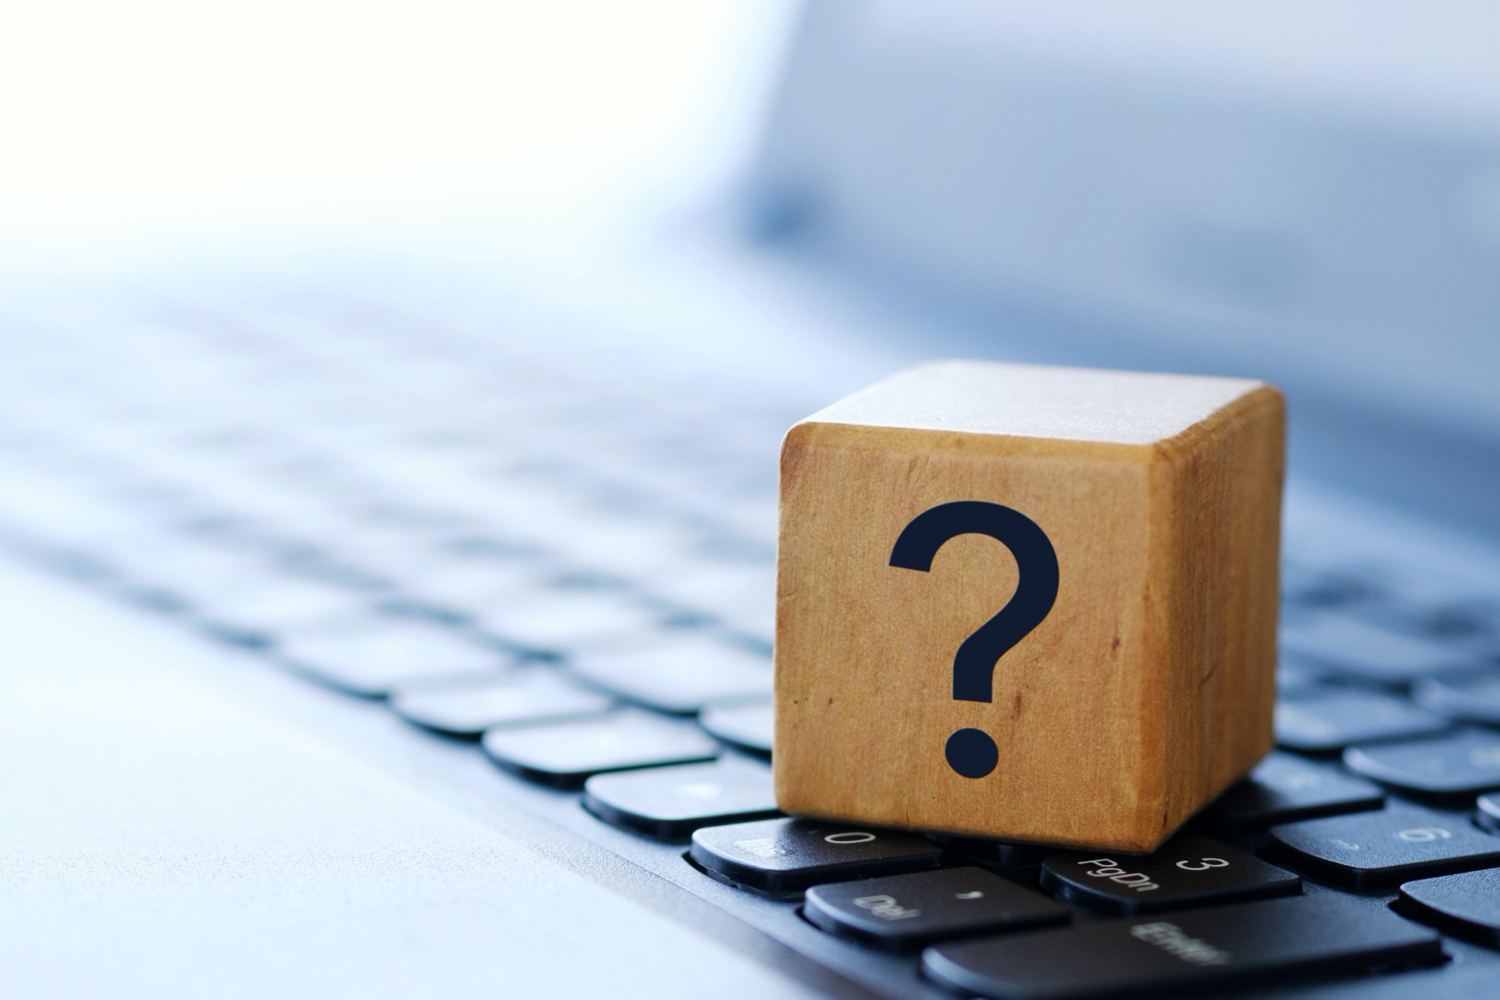 question-mark-wooden-cube-computer-keyboard-with-blurred-background-shallow-depth-field.jpg